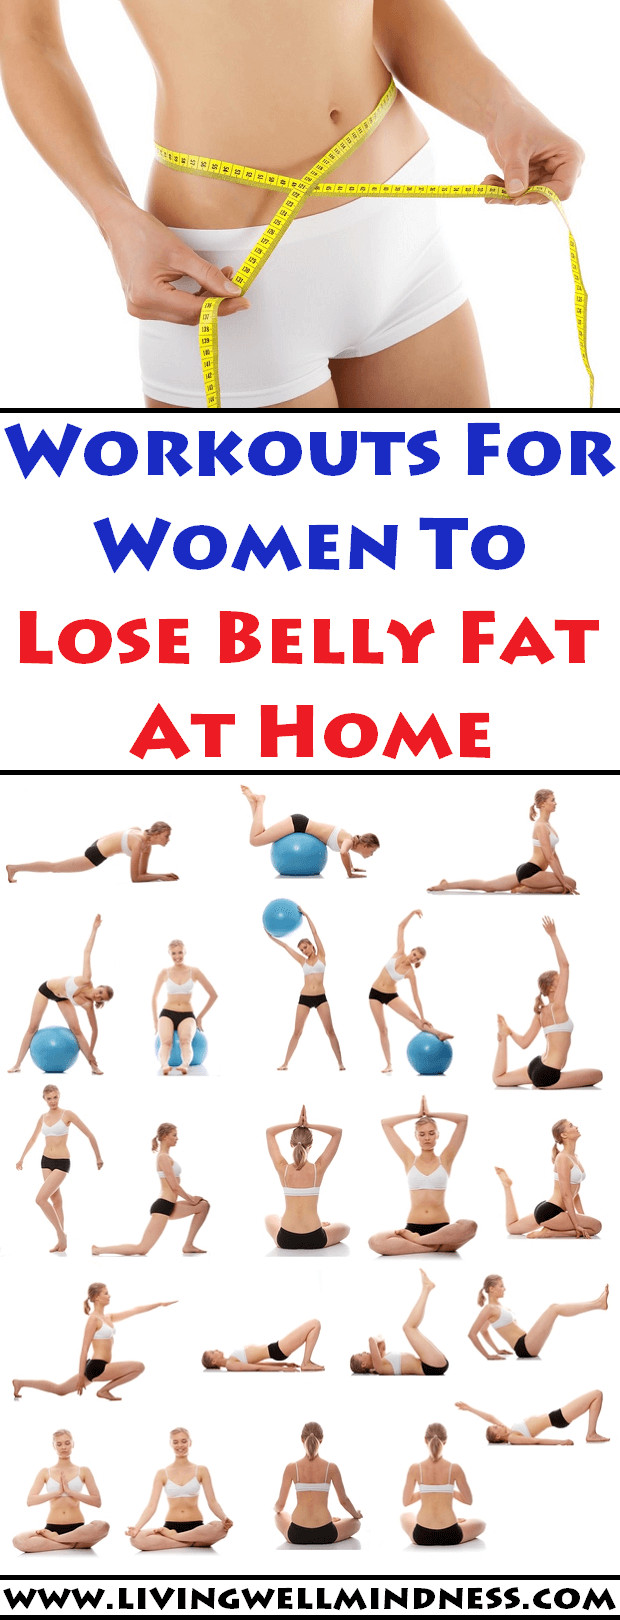 Belly Weight Loss Exercises
 50 INFO 10 EASY EXERCISES TO LOSE BELLY FAT WITH VIDEO